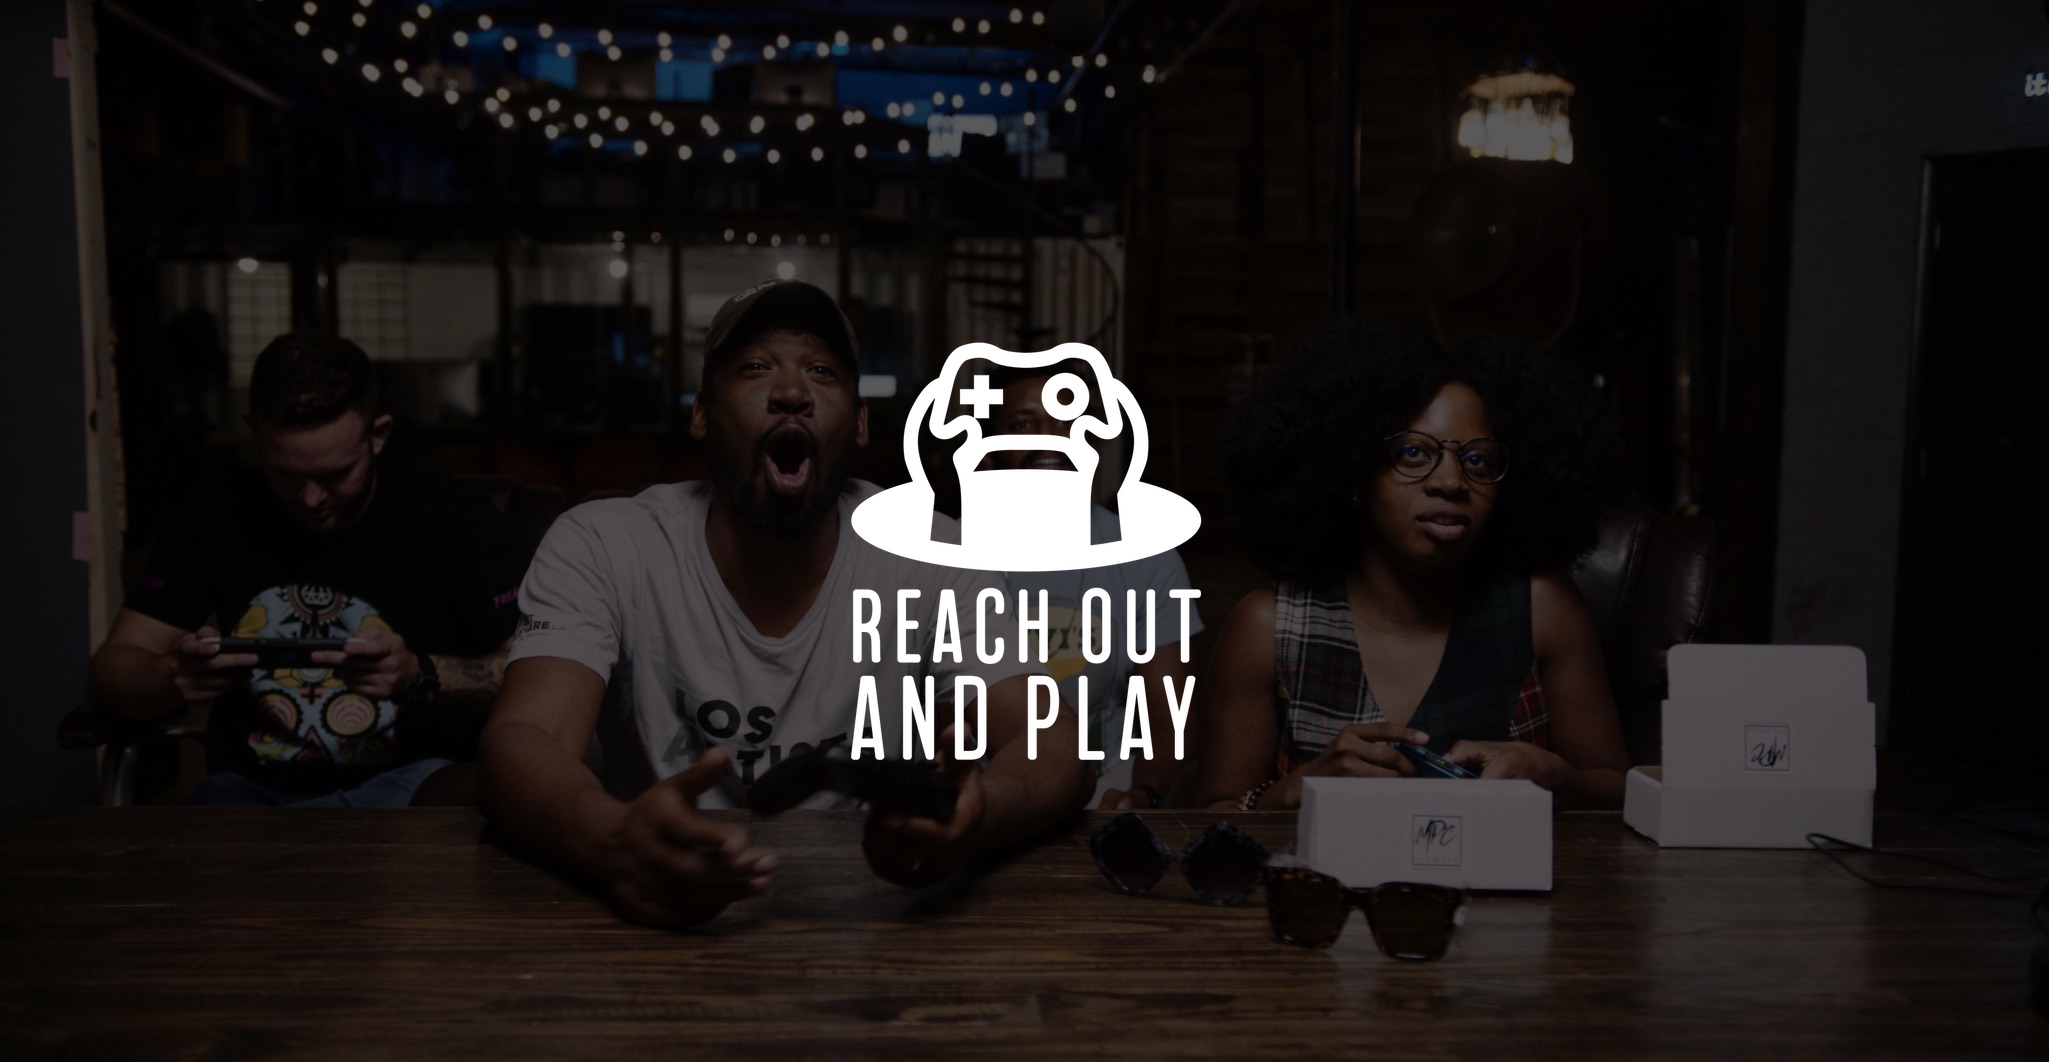 White Reach Out and Play icon with dimmed background of three men and a woman playing video game with video game controllers with two shades and white boxes on the table in front of them